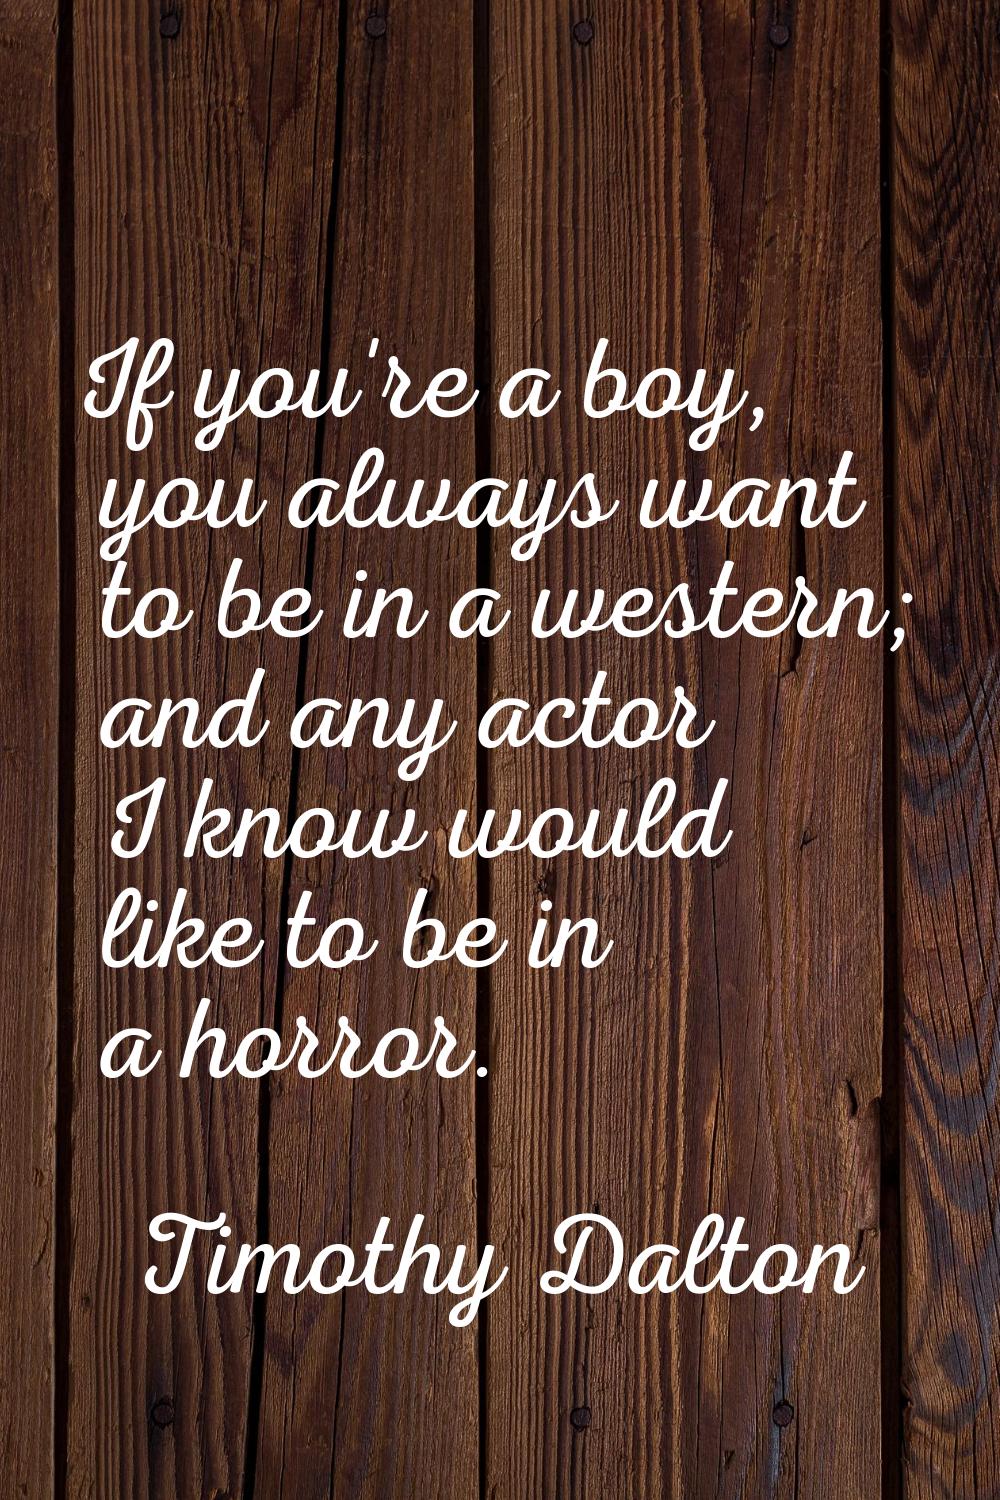 If you're a boy, you always want to be in a western; and any actor I know would like to be in a hor